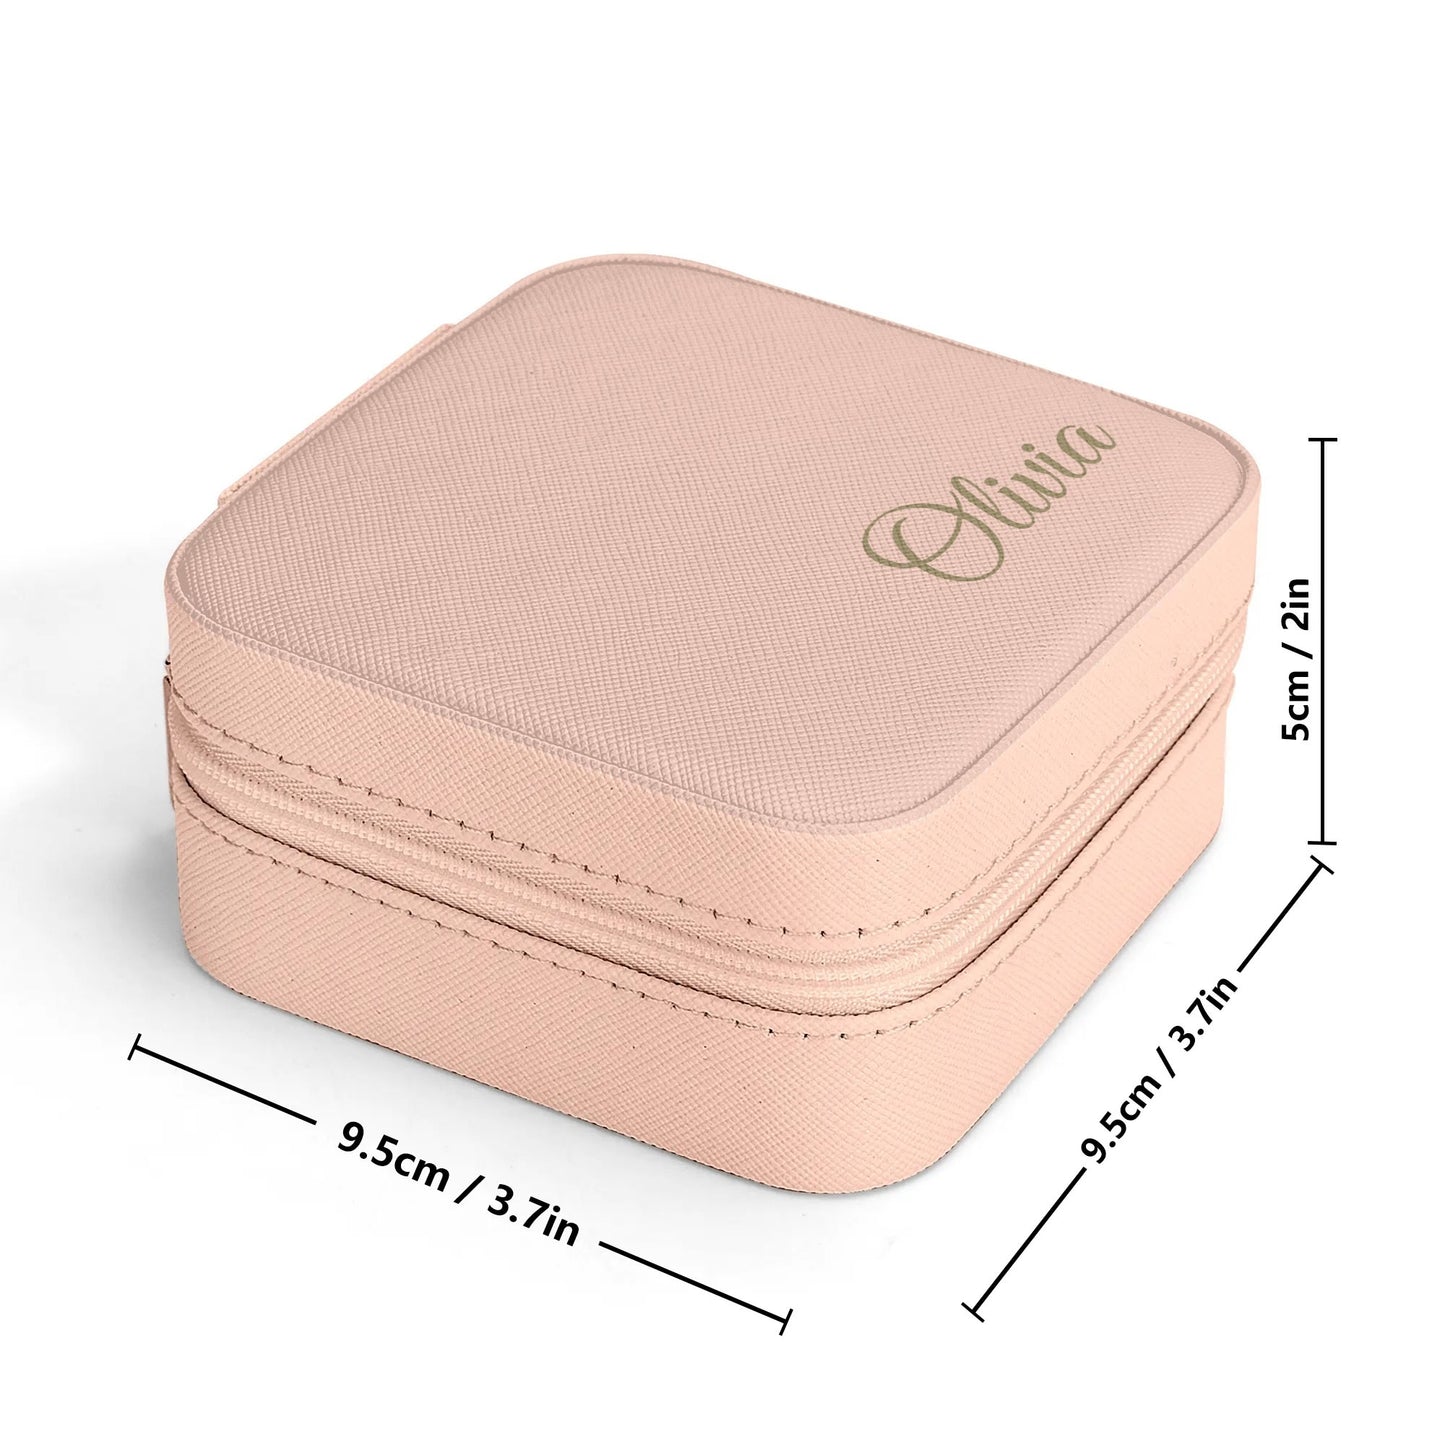 Get trendy with Personalized Square Jewelry Case Display Box with Zipper -  available at Good Gift Company. Grab yours for $10.98 today!